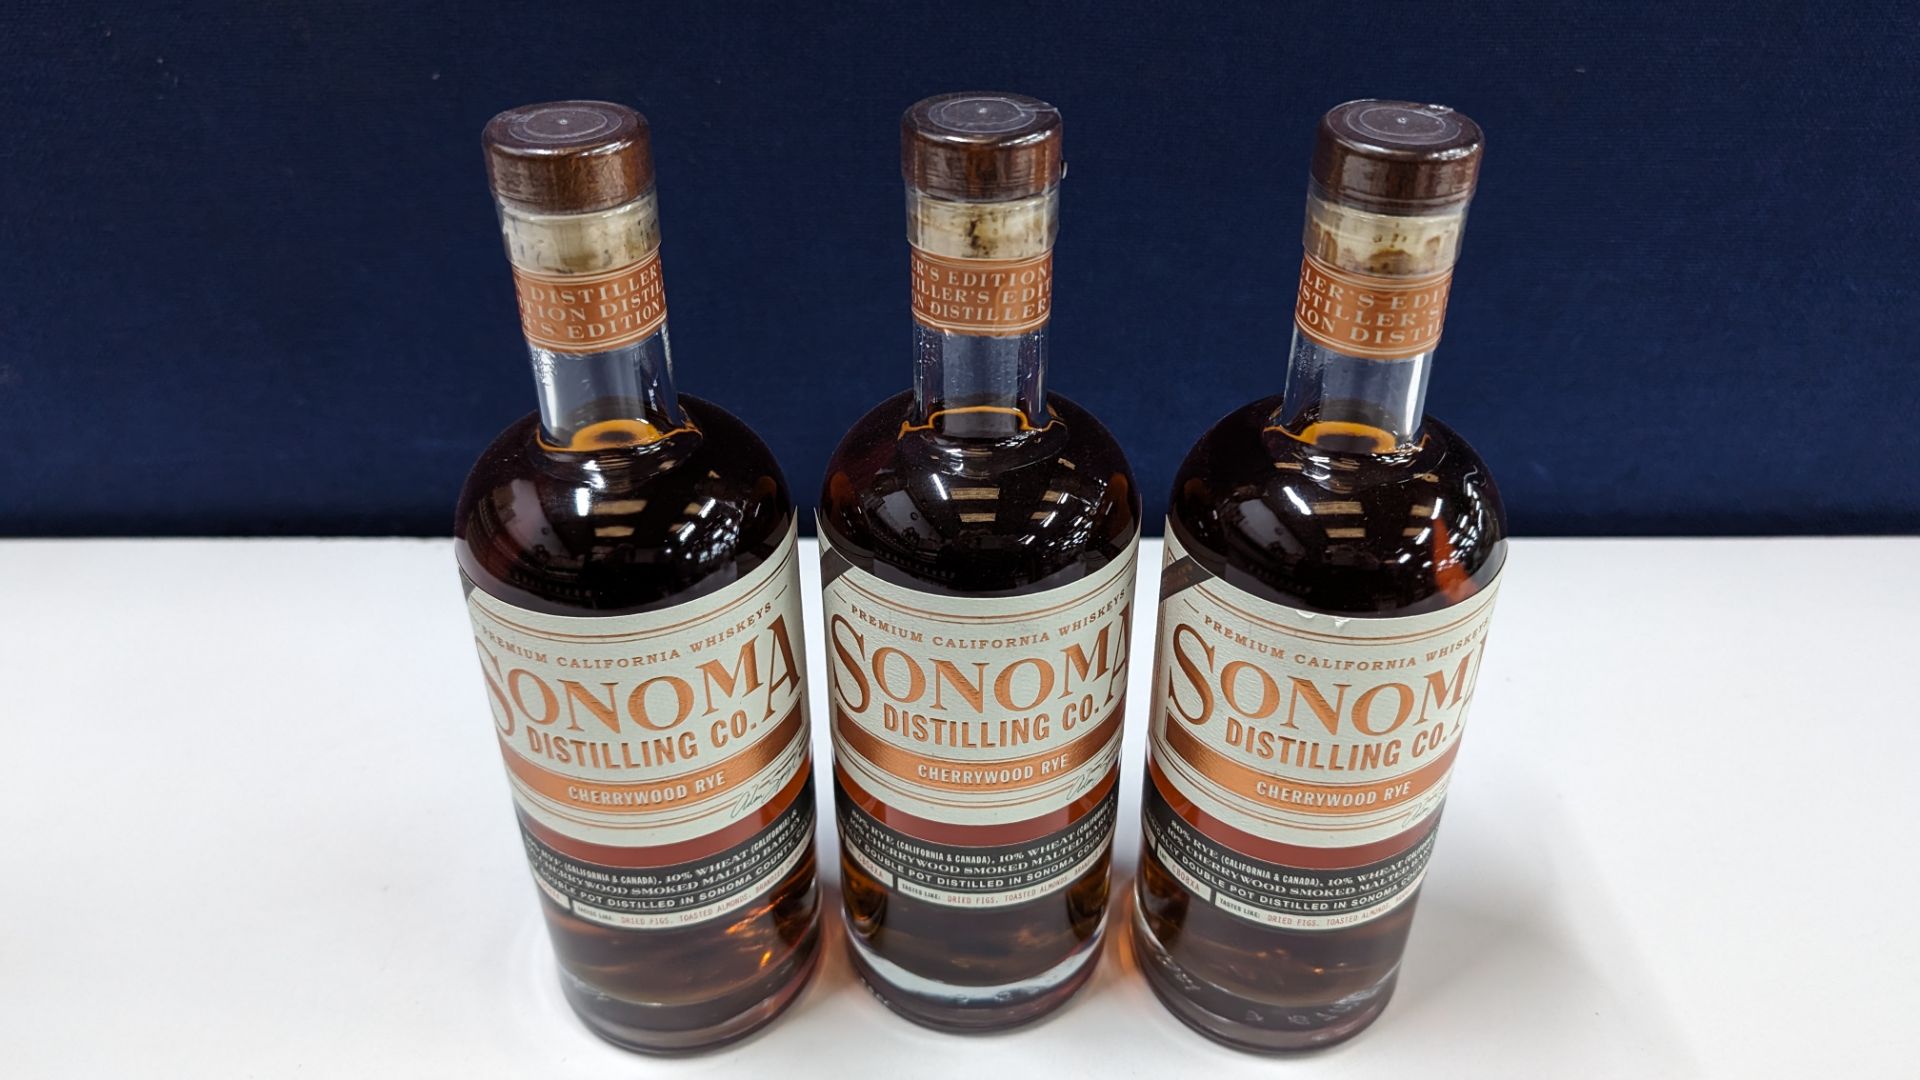 3 off 700ml bottles of Sonoma Cherrywood Rye Whiskey. 47.8% alc/vol (95.6 proof). Distilled and bo